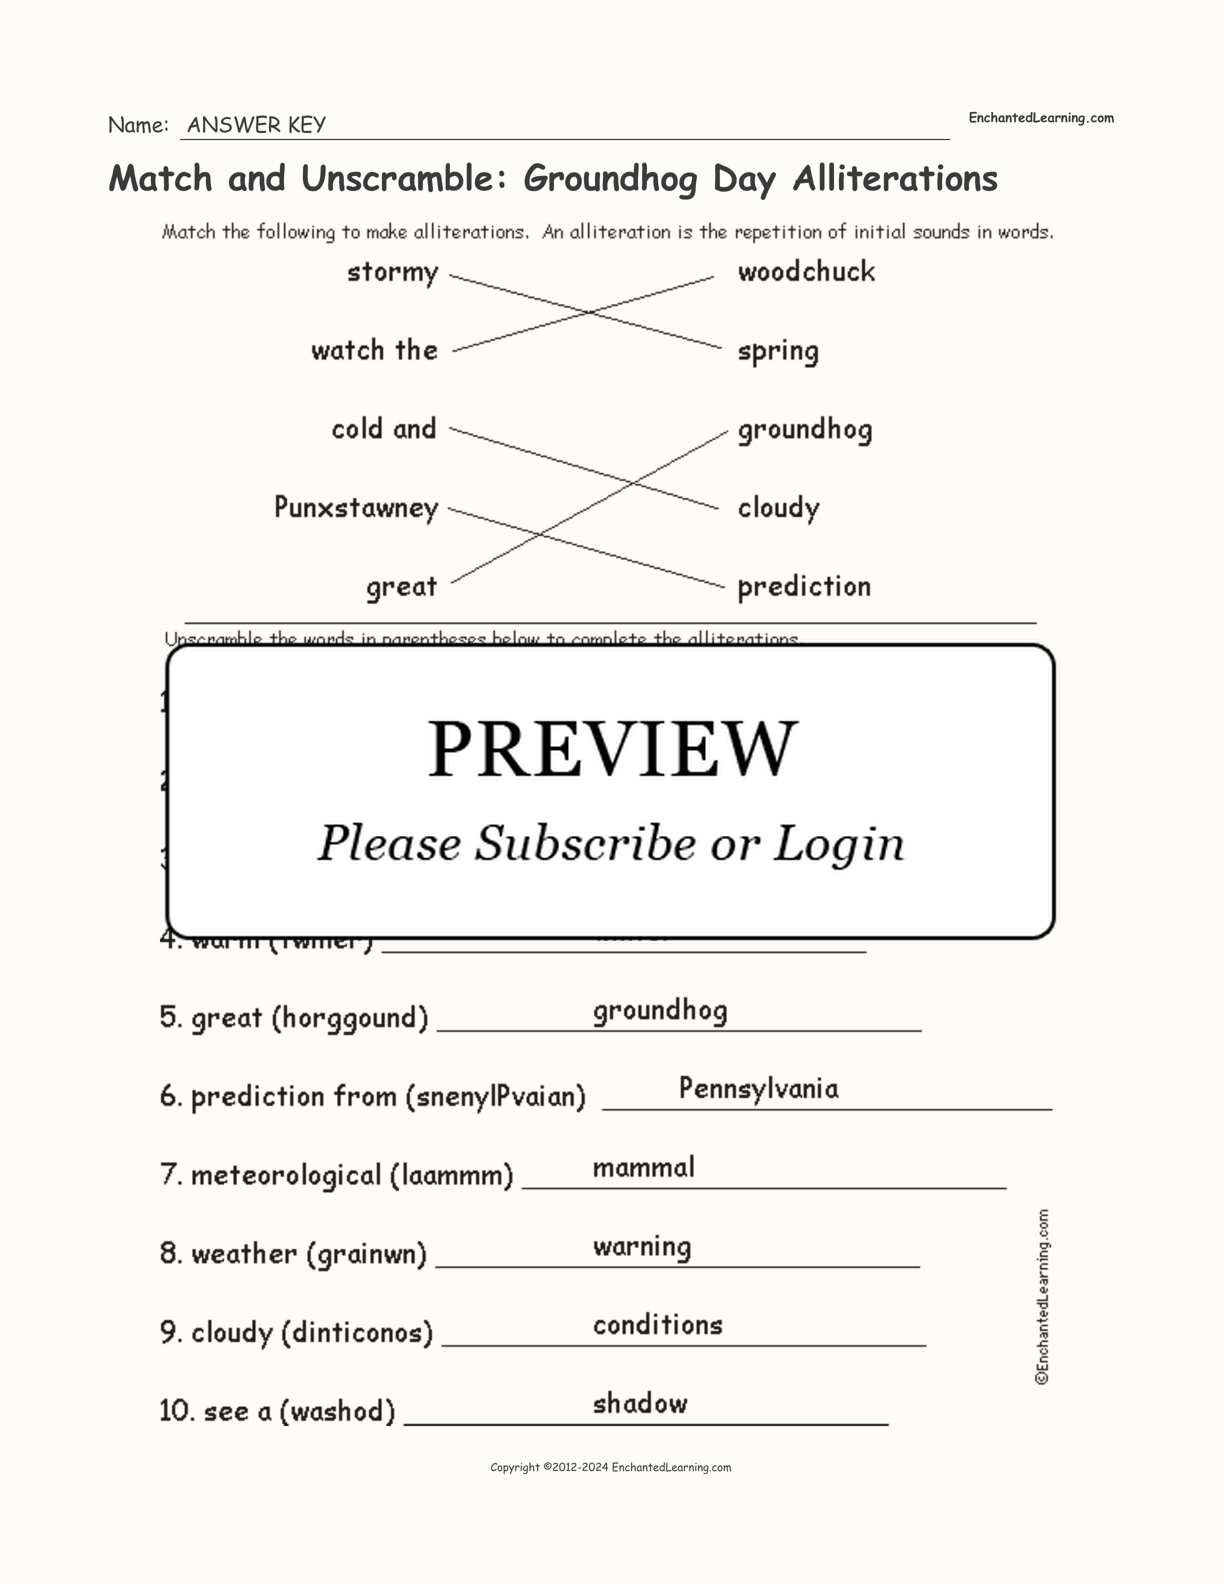 Match and Unscramble: Groundhog Day Alliterations interactive worksheet page 2